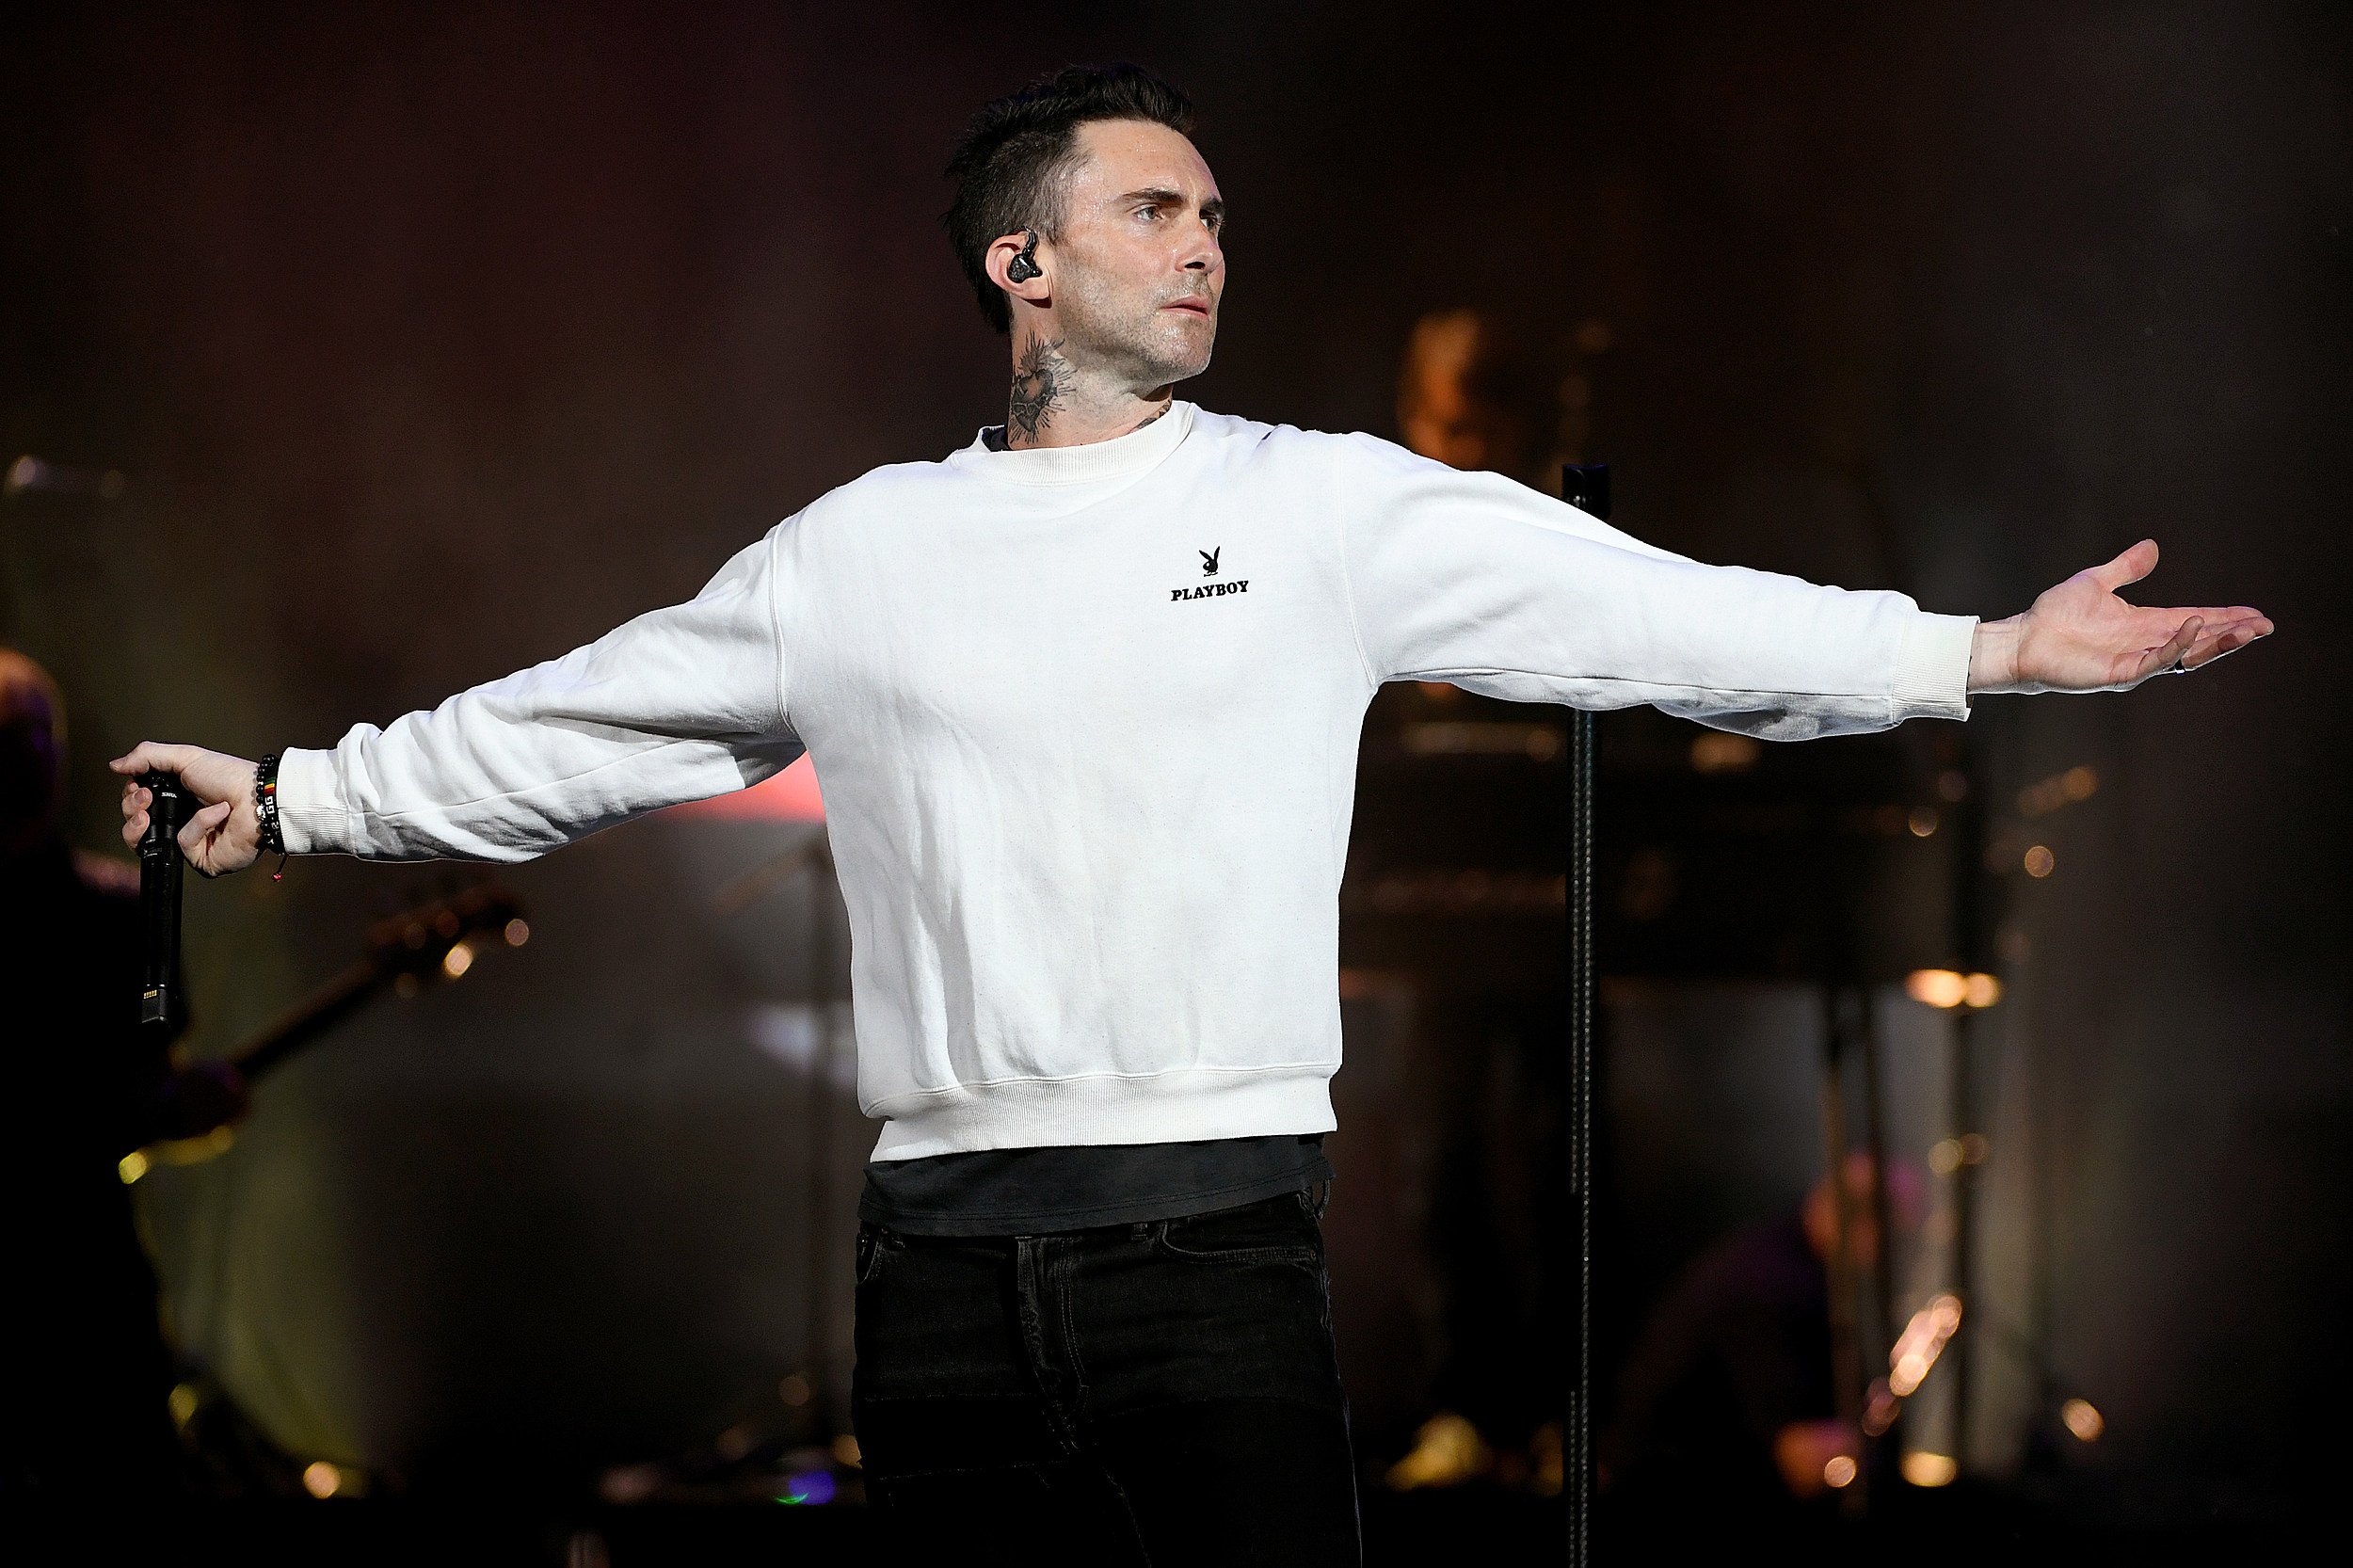 Maroon 5 honour late rappers Juice WRLD and Nipsey Hussle with